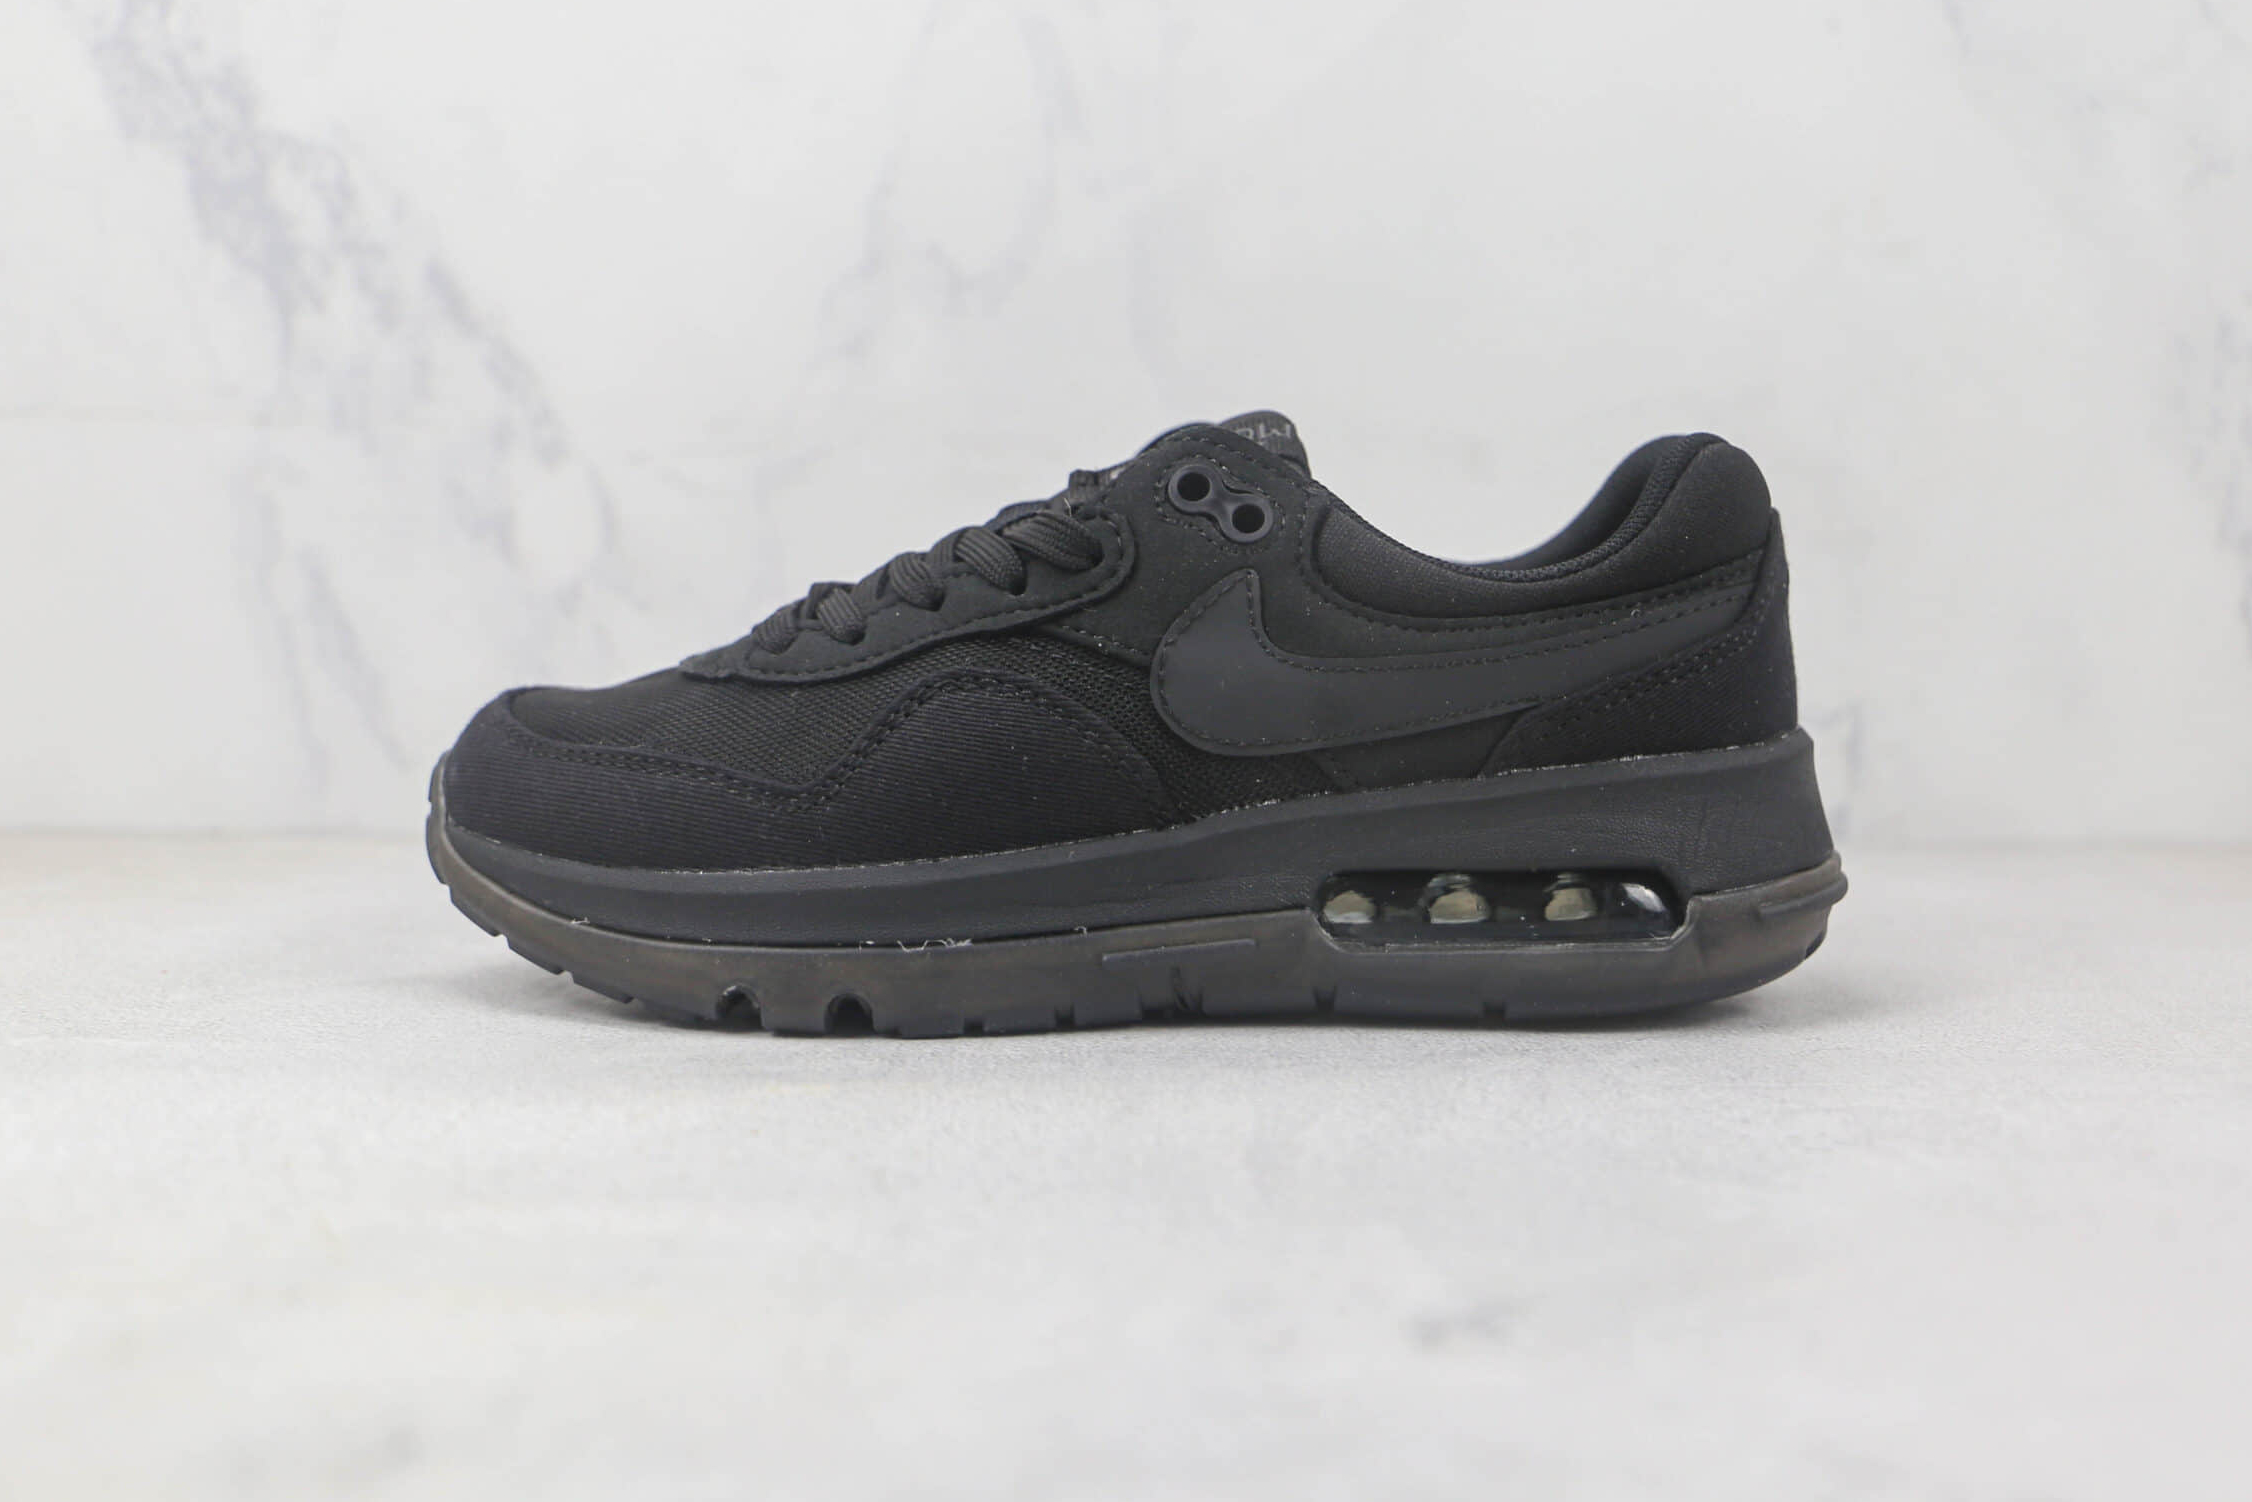 Nike Air Max Motif Low Tops Retro Black DH4801-003 - Classic Style and Comfort